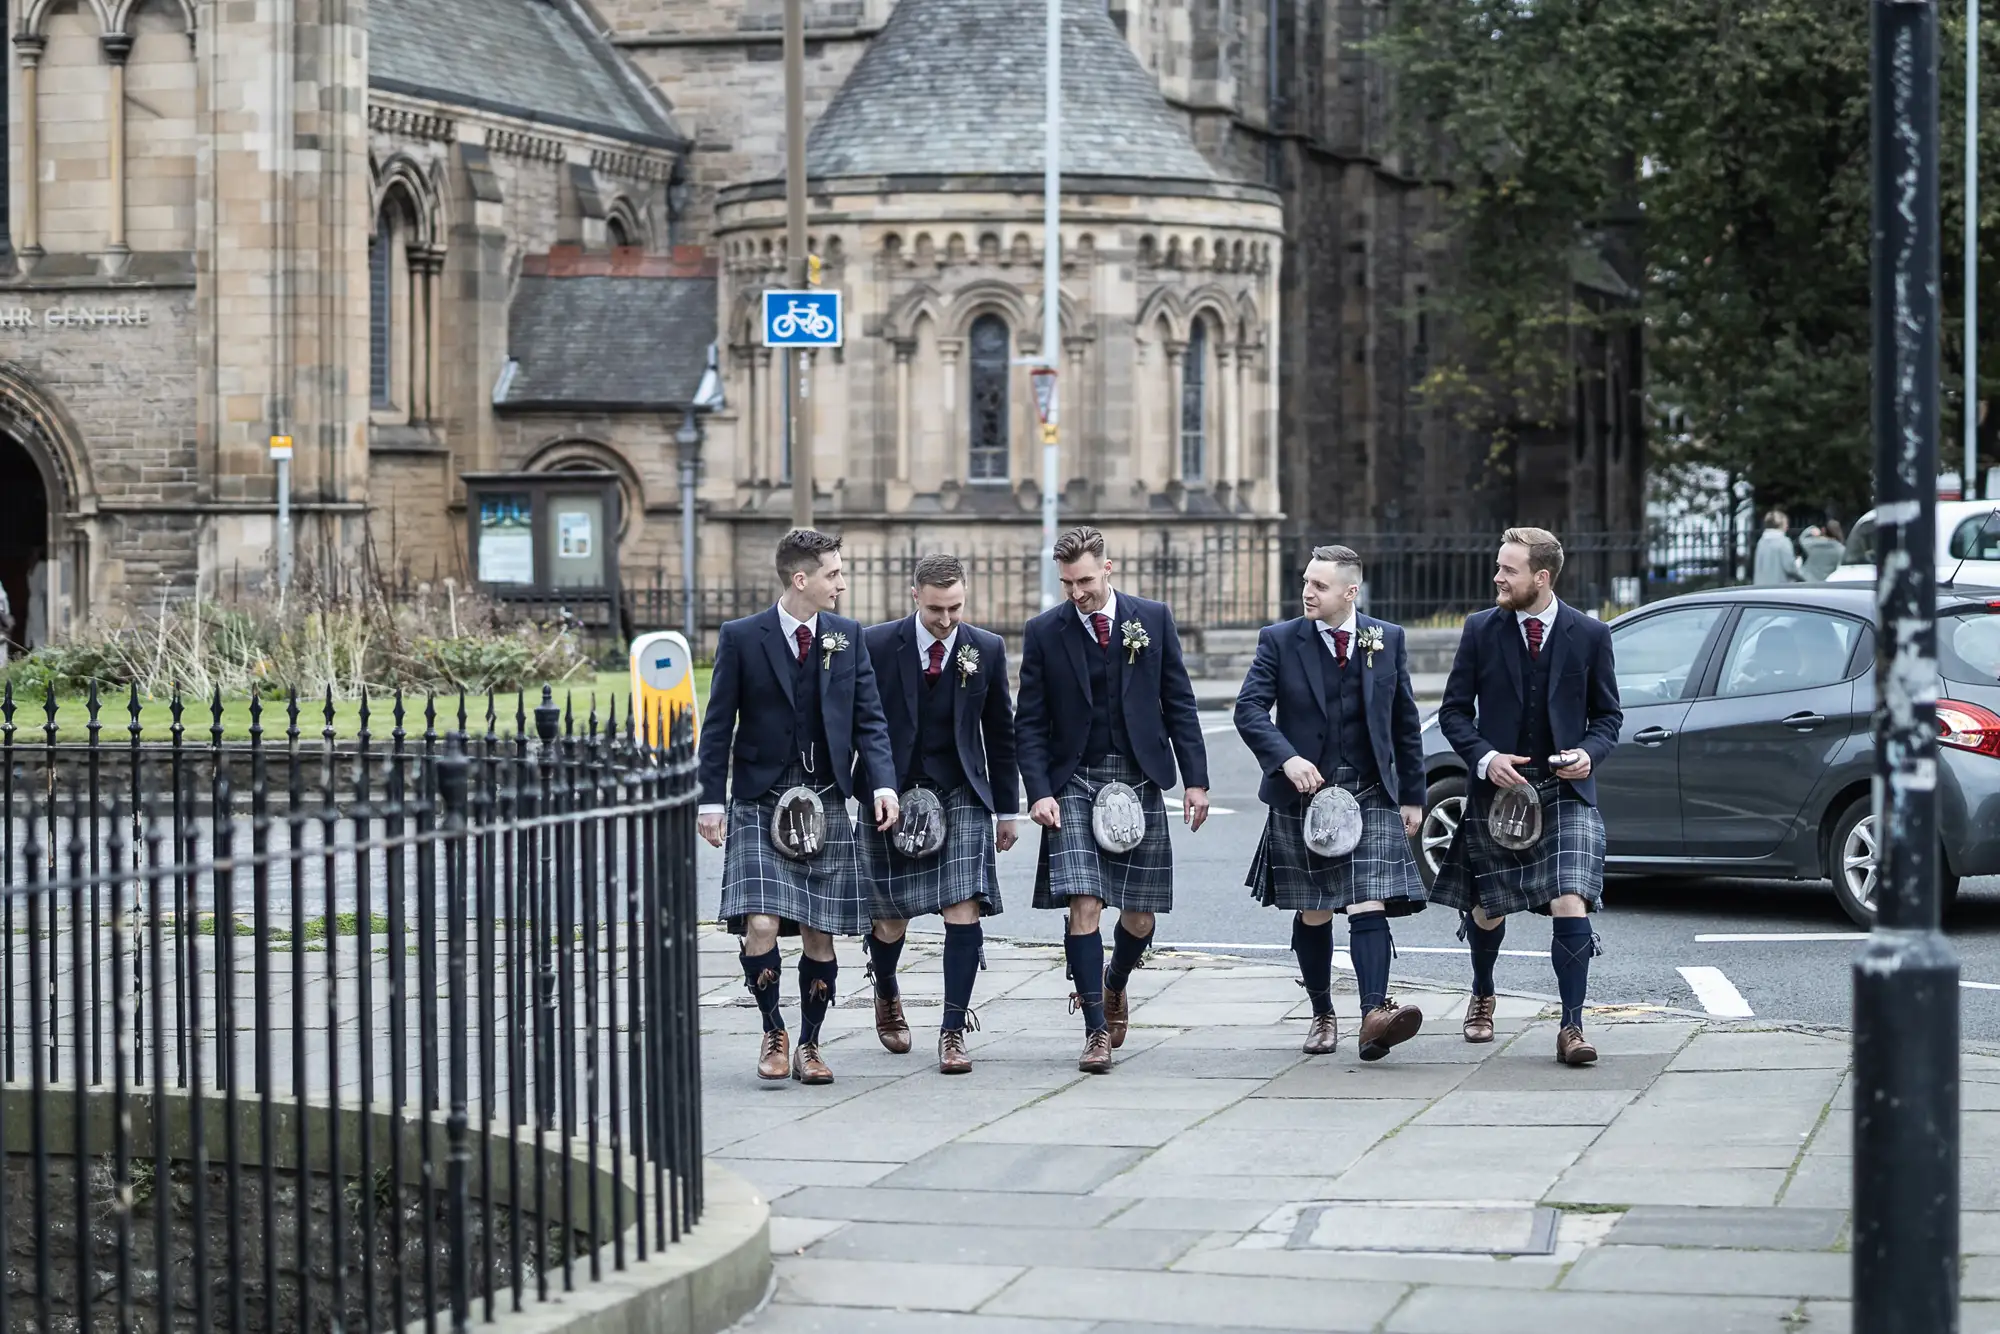 Four men in kilts and blazers walking along a city street, with historic architecture in the background.